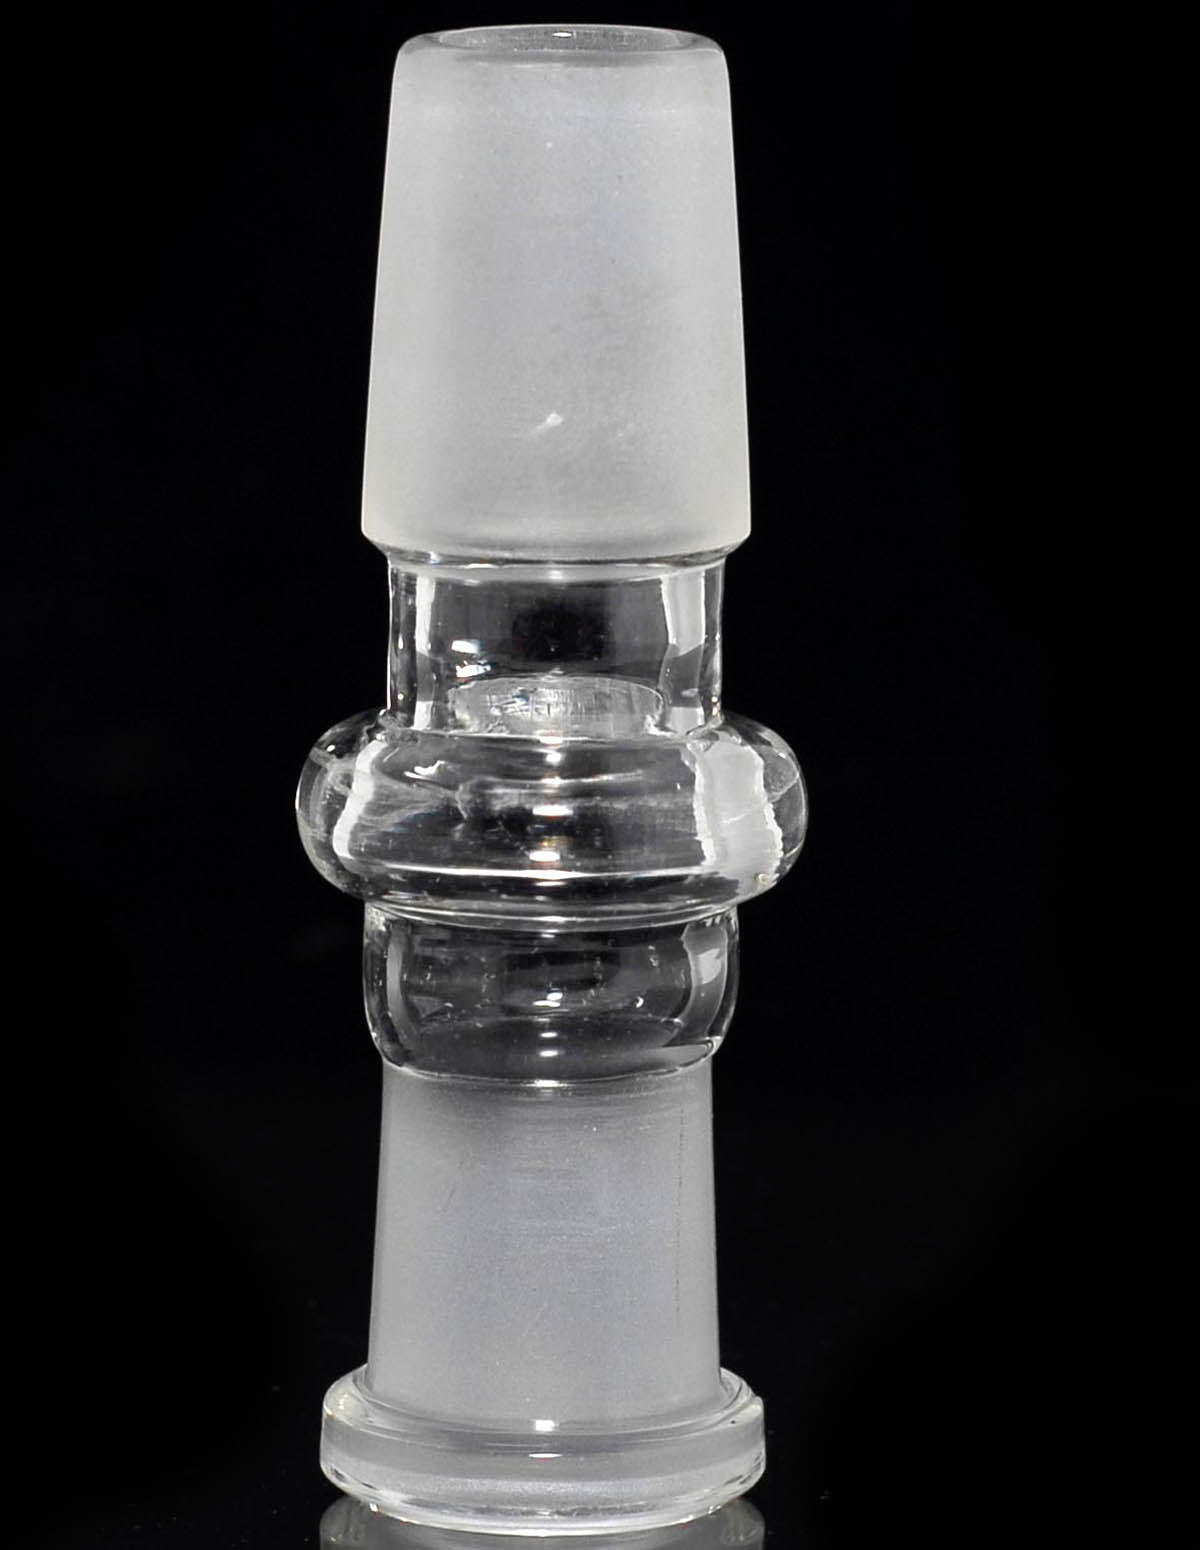 Glass adapter 18mm male to 14mm famale joint adapter.